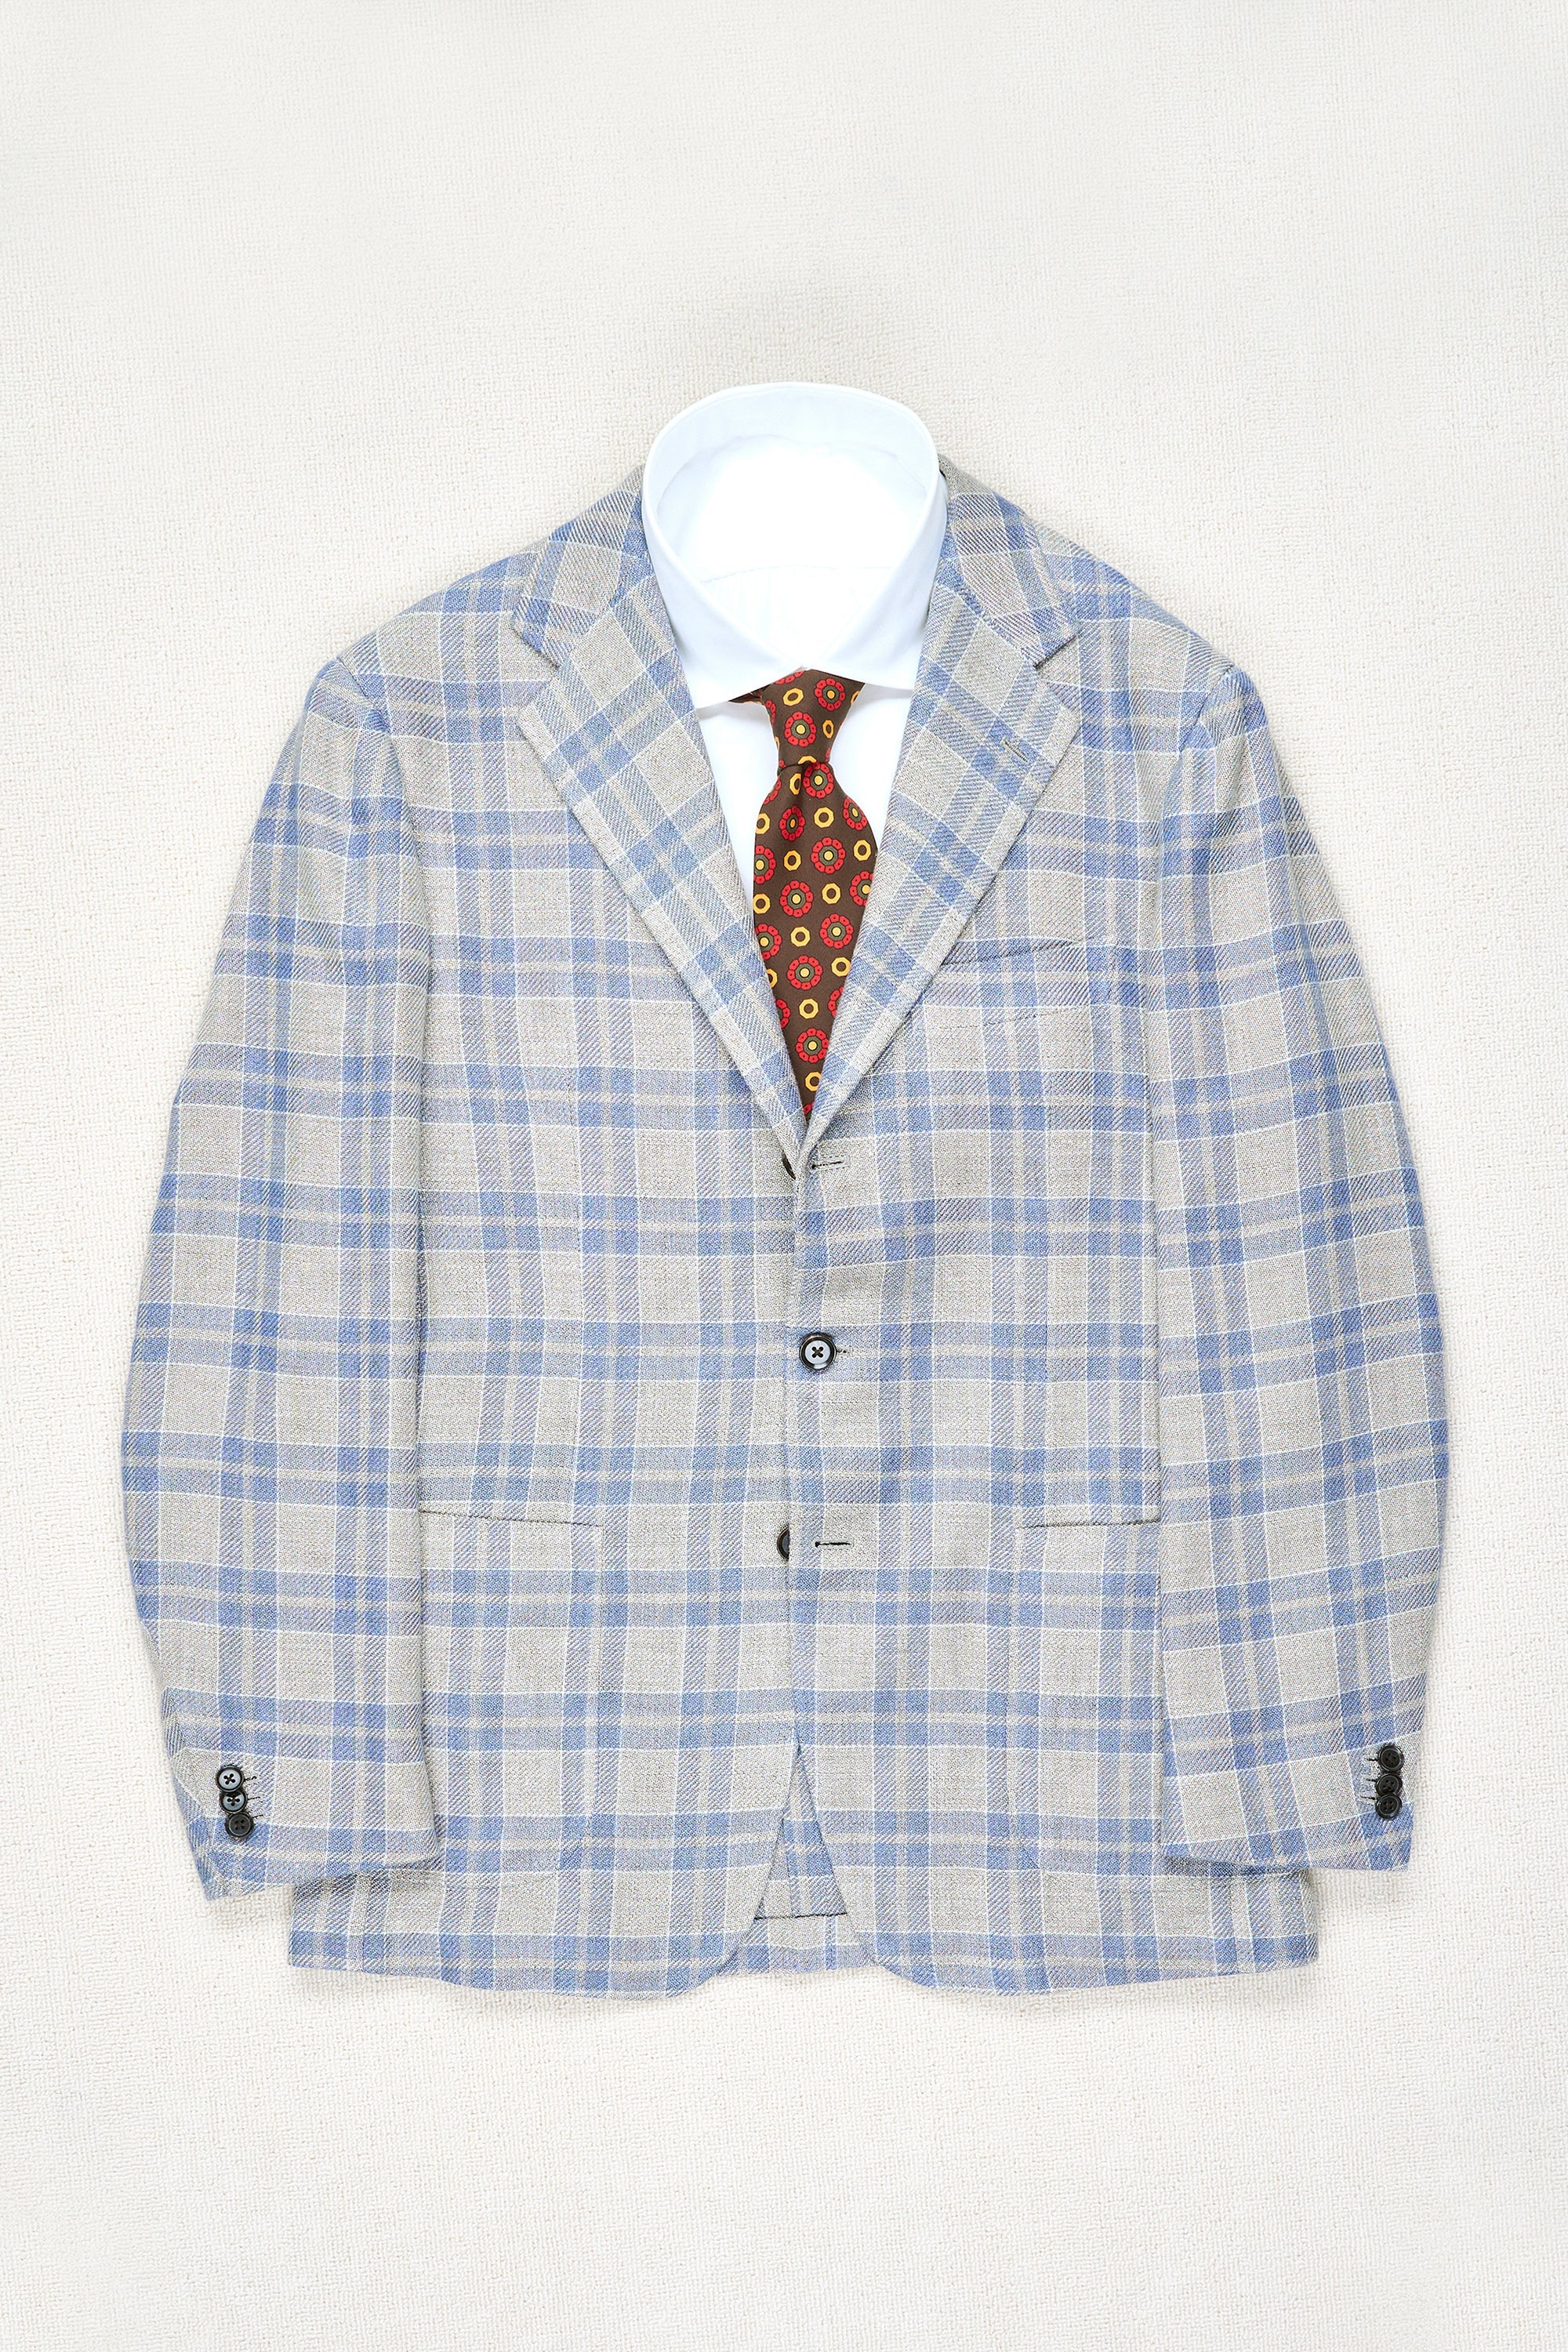 The Armoury by Ring Jacket Model 3 Light Blue/Cream Check Linen/Wool Sport Coat